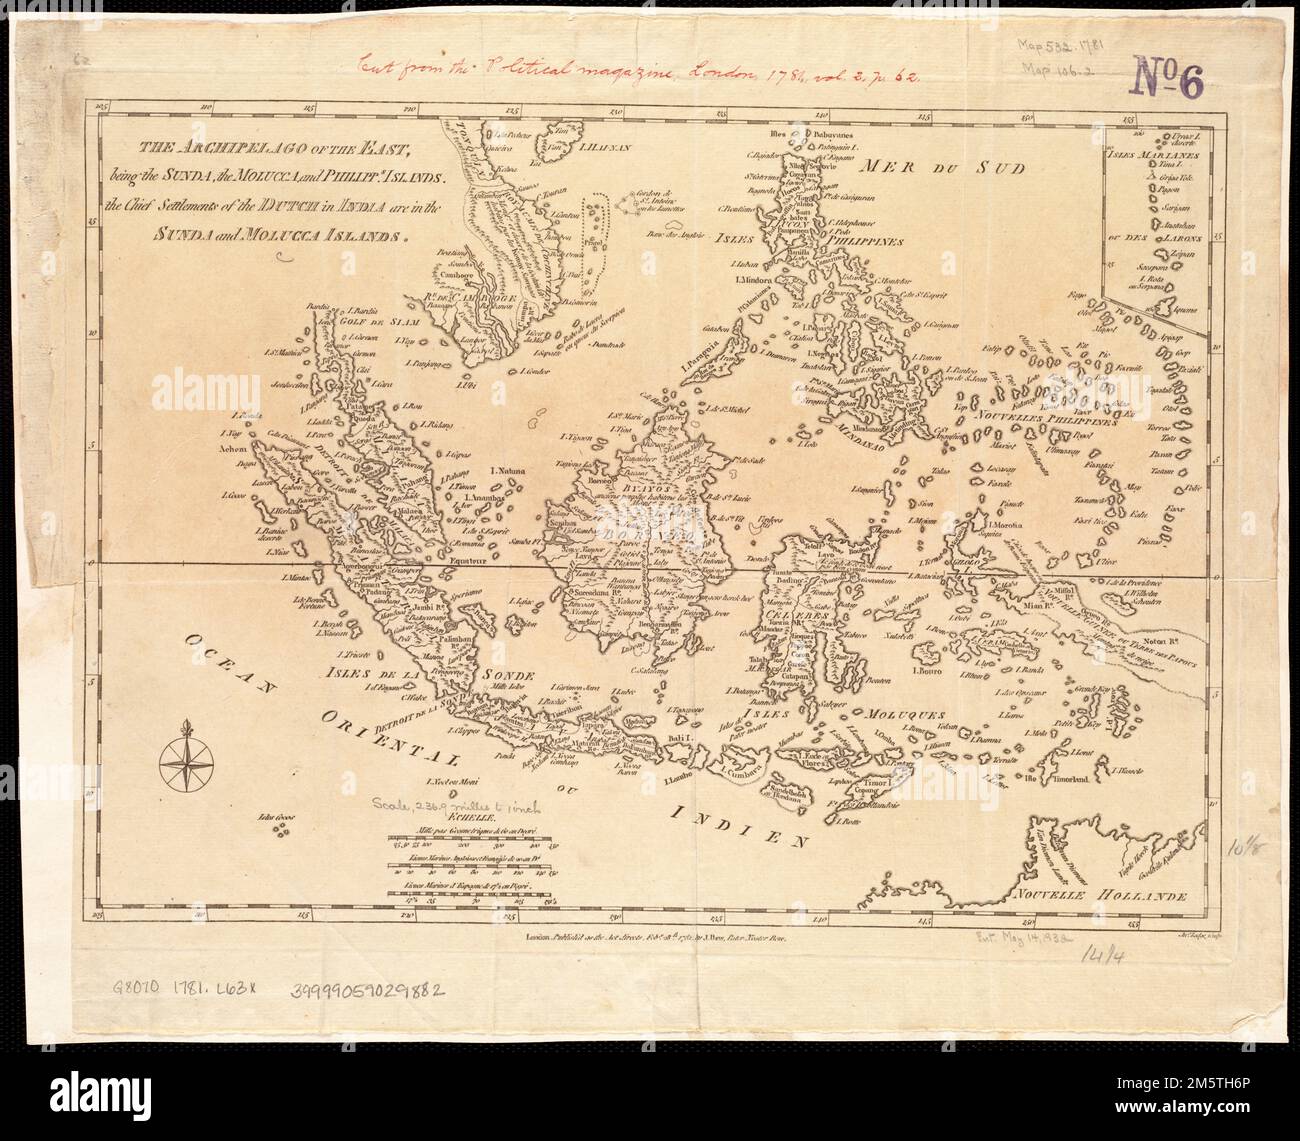 The archipelago of the East, being the Sunda, the Molucca, and Phillipps. Islands : the chief settlements of the Dutch in India are in the Sunda and Molucca Islands. Relief shown pictorially. Map of the southern part of the Malay peninsula, Borneo, the islands of the Indonesian archipelago and the Philippines. Appears in The Political Magazine. London : J. Bew, 1781. Vol. 2, p. 62.... , Indonesia Philippines Malaysia Stock Photo